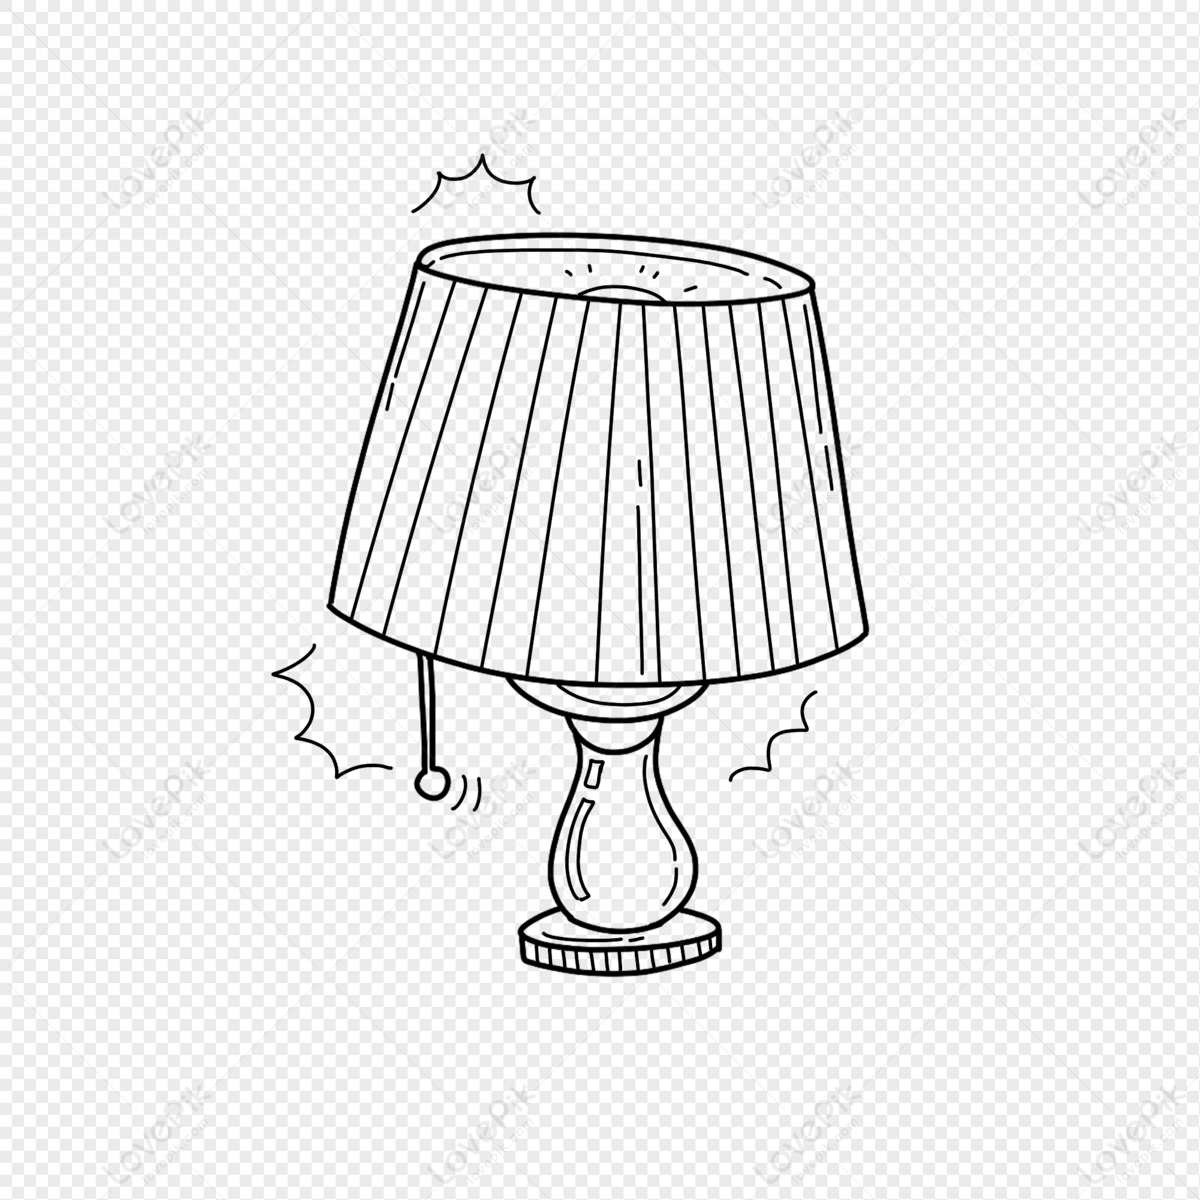 How to draw table lamp step by step - Pencil color drawing - YouTube